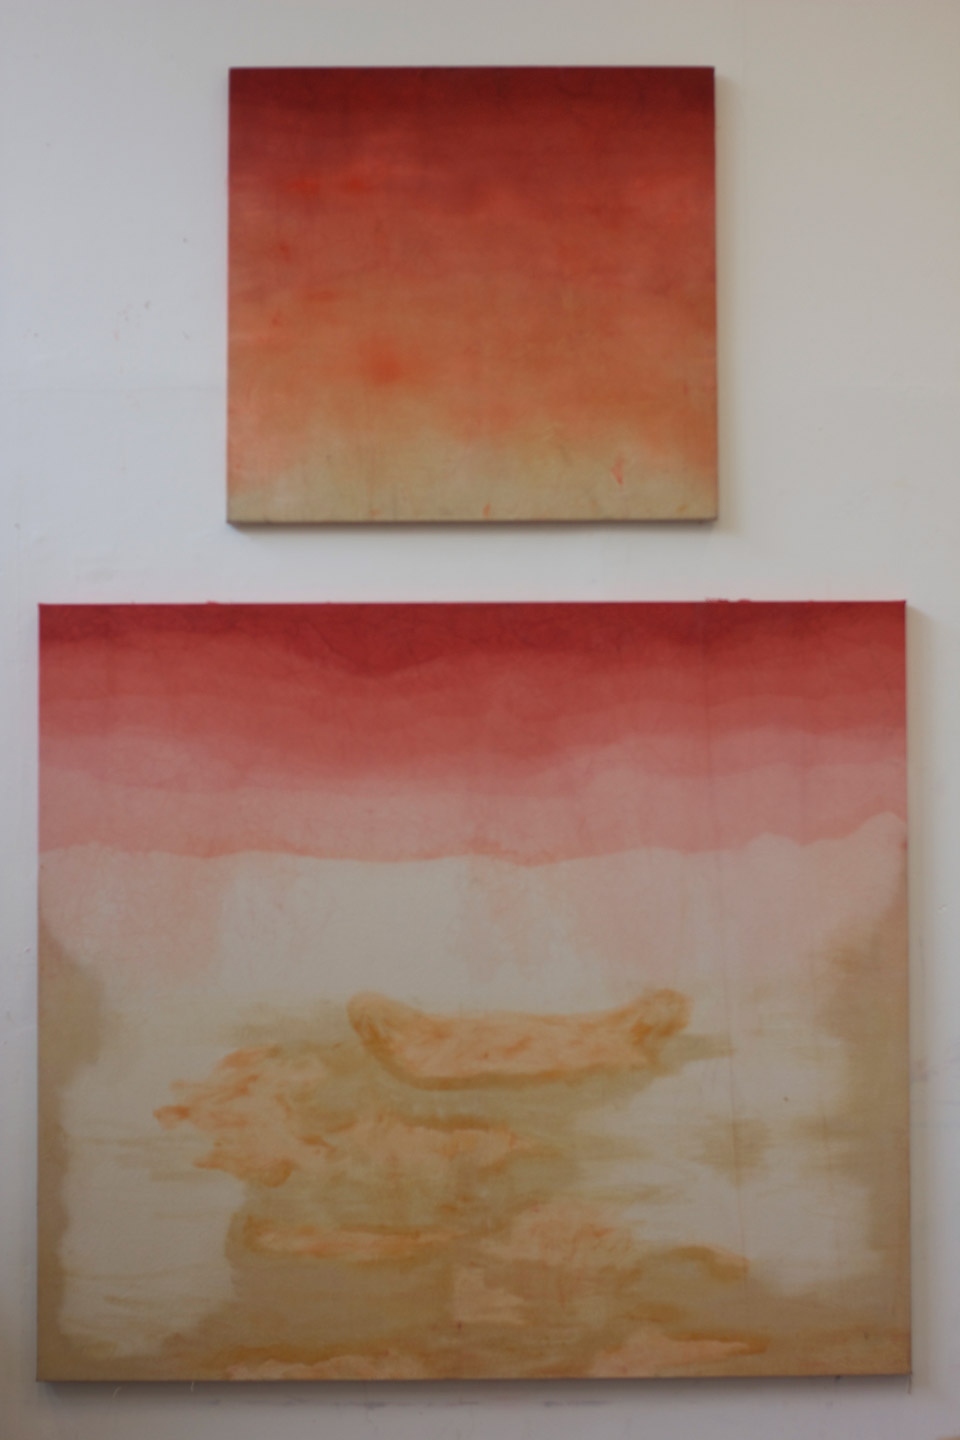 Sweaty paintings 2, 2013, dyed cotton canvas, oil pastel, linseed oil, beeswax, 170  x 150, 80  x 60 cm